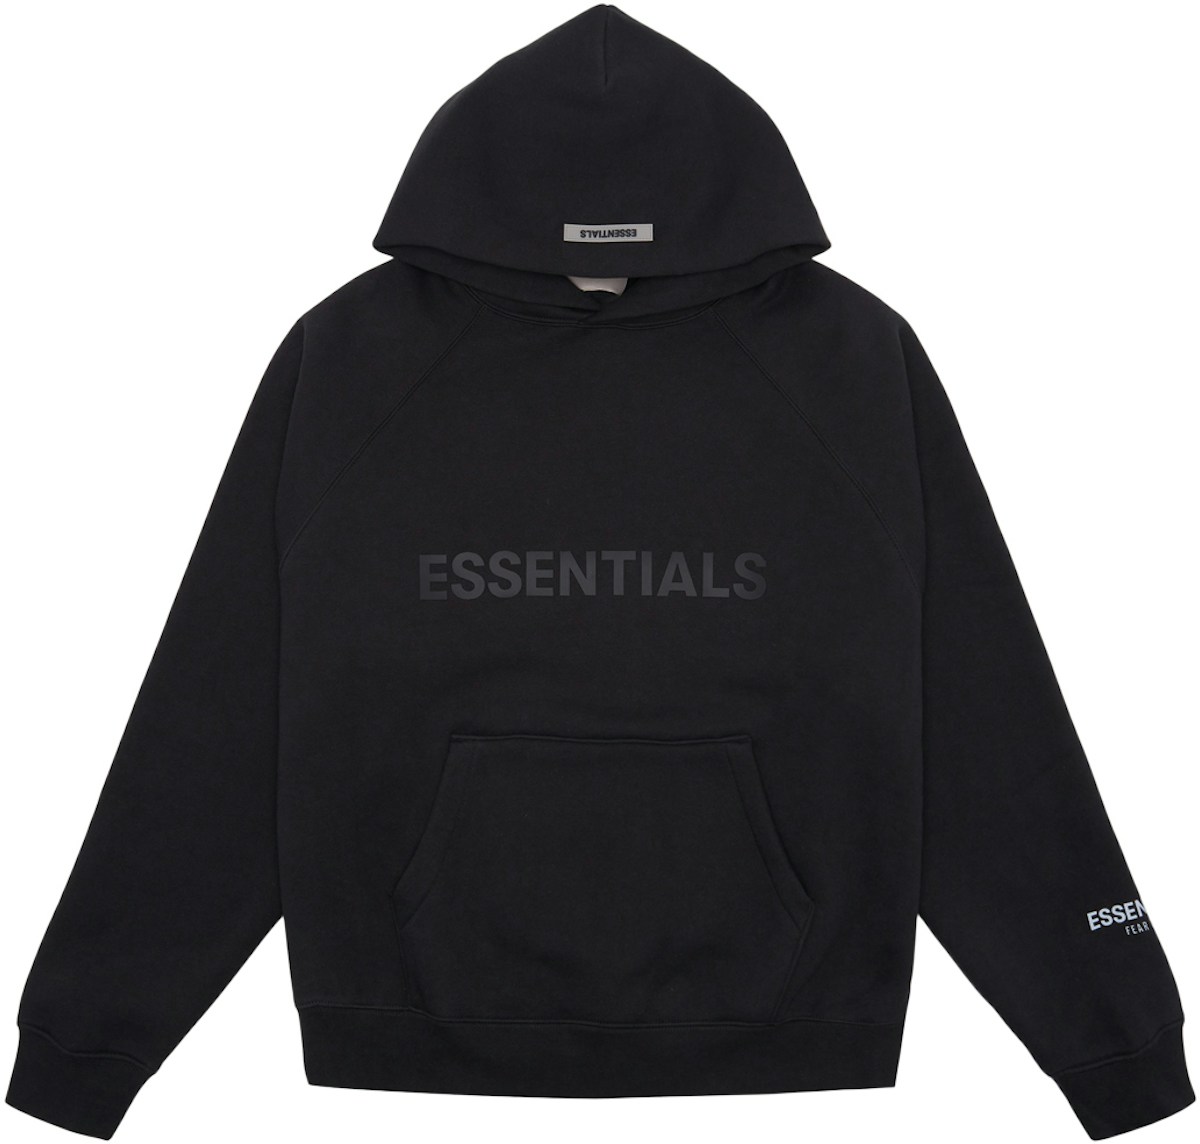 FEAR OF GOD ESSENTIALS 3D Silicon Applique Pullover Hoodie Dark Slate ...